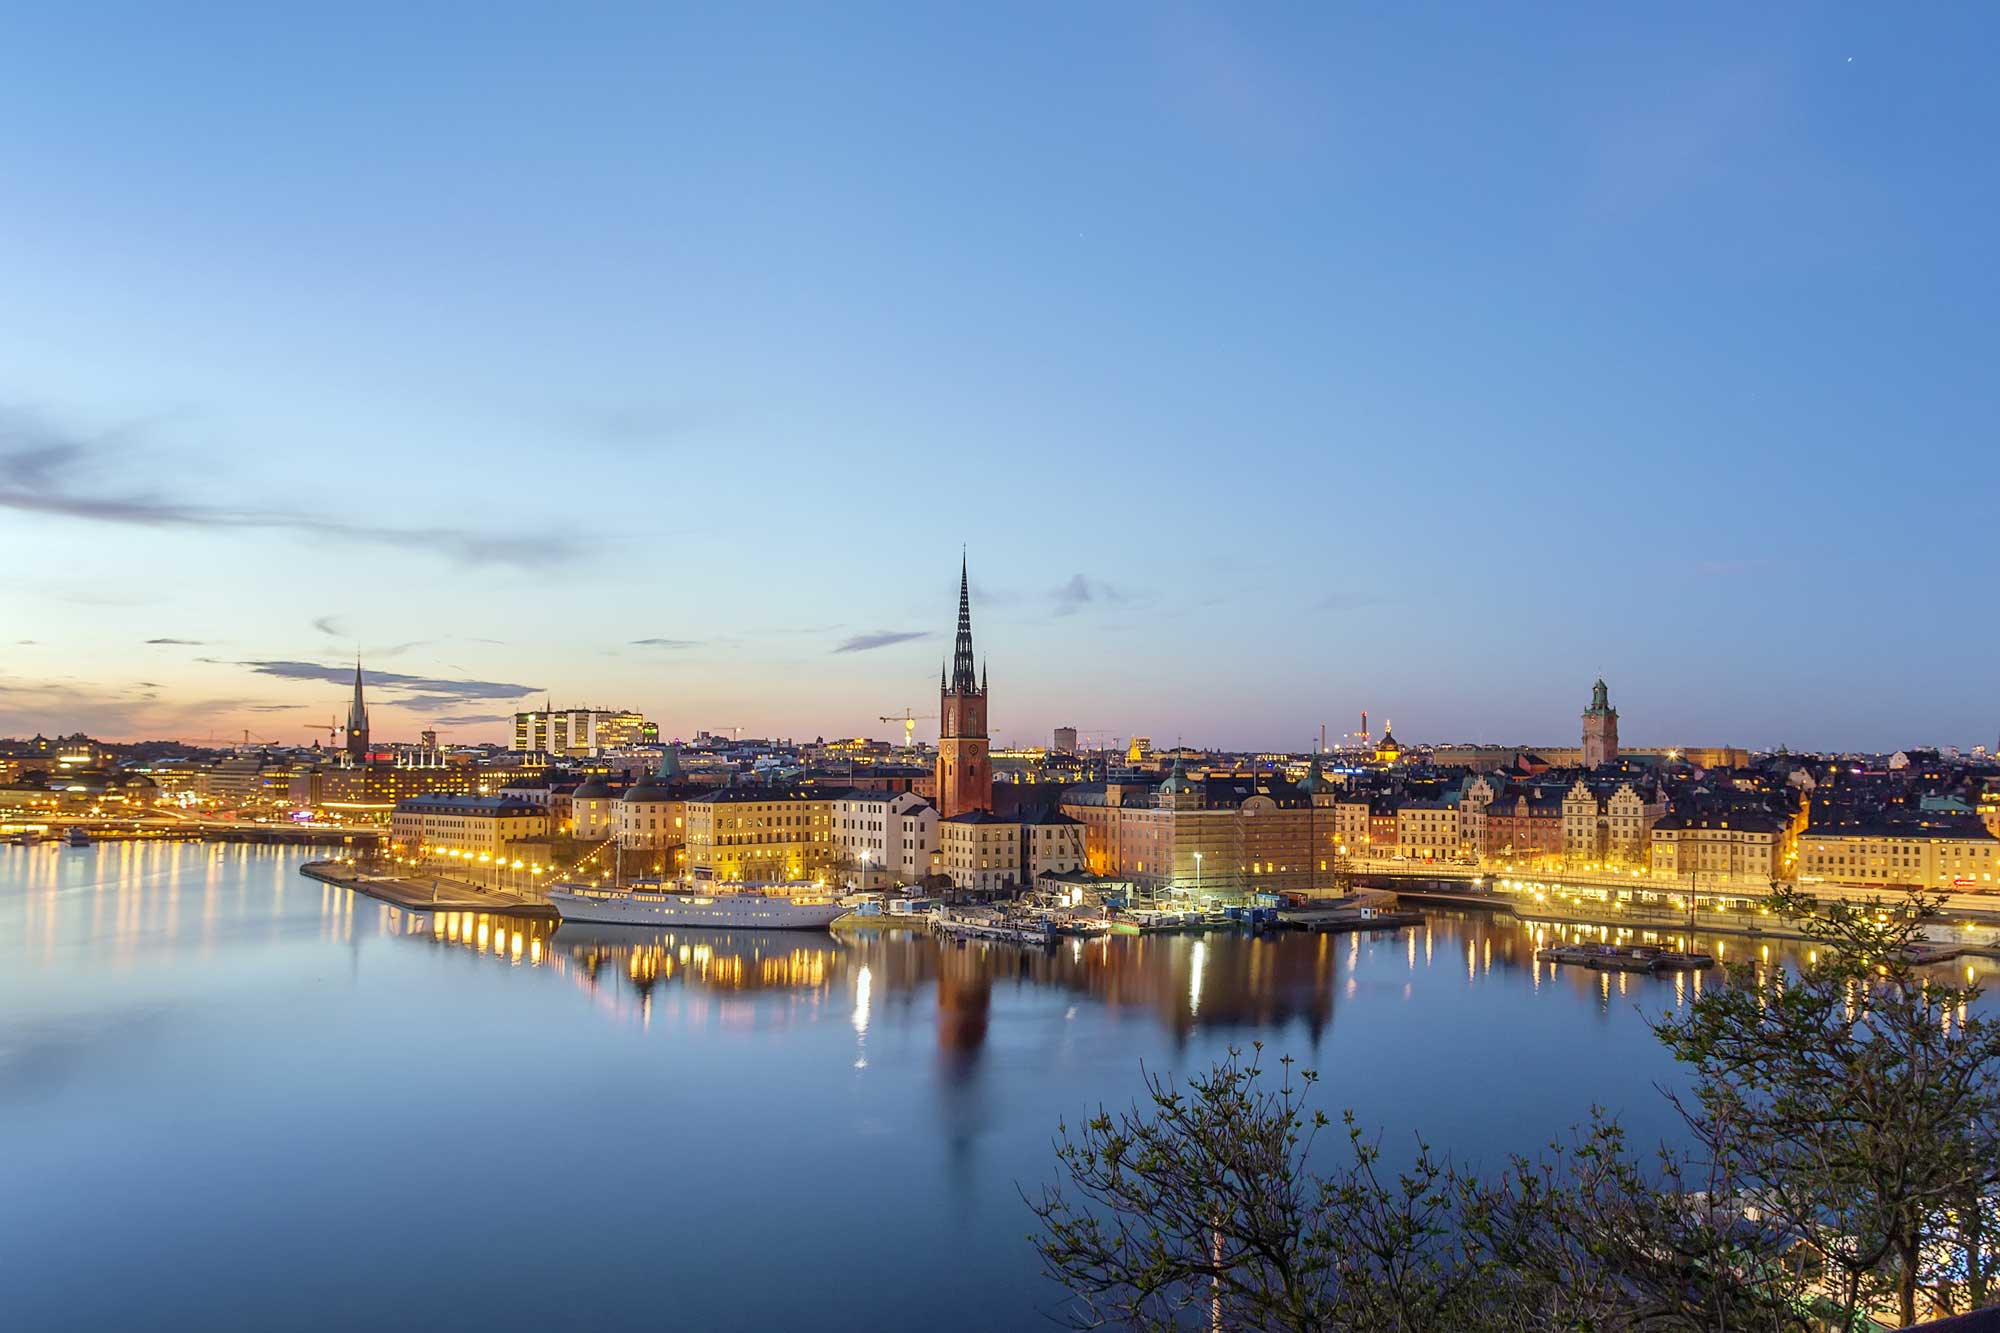 View of Riddarholmen from the Sodermalm island in Stockholm, Sweden.